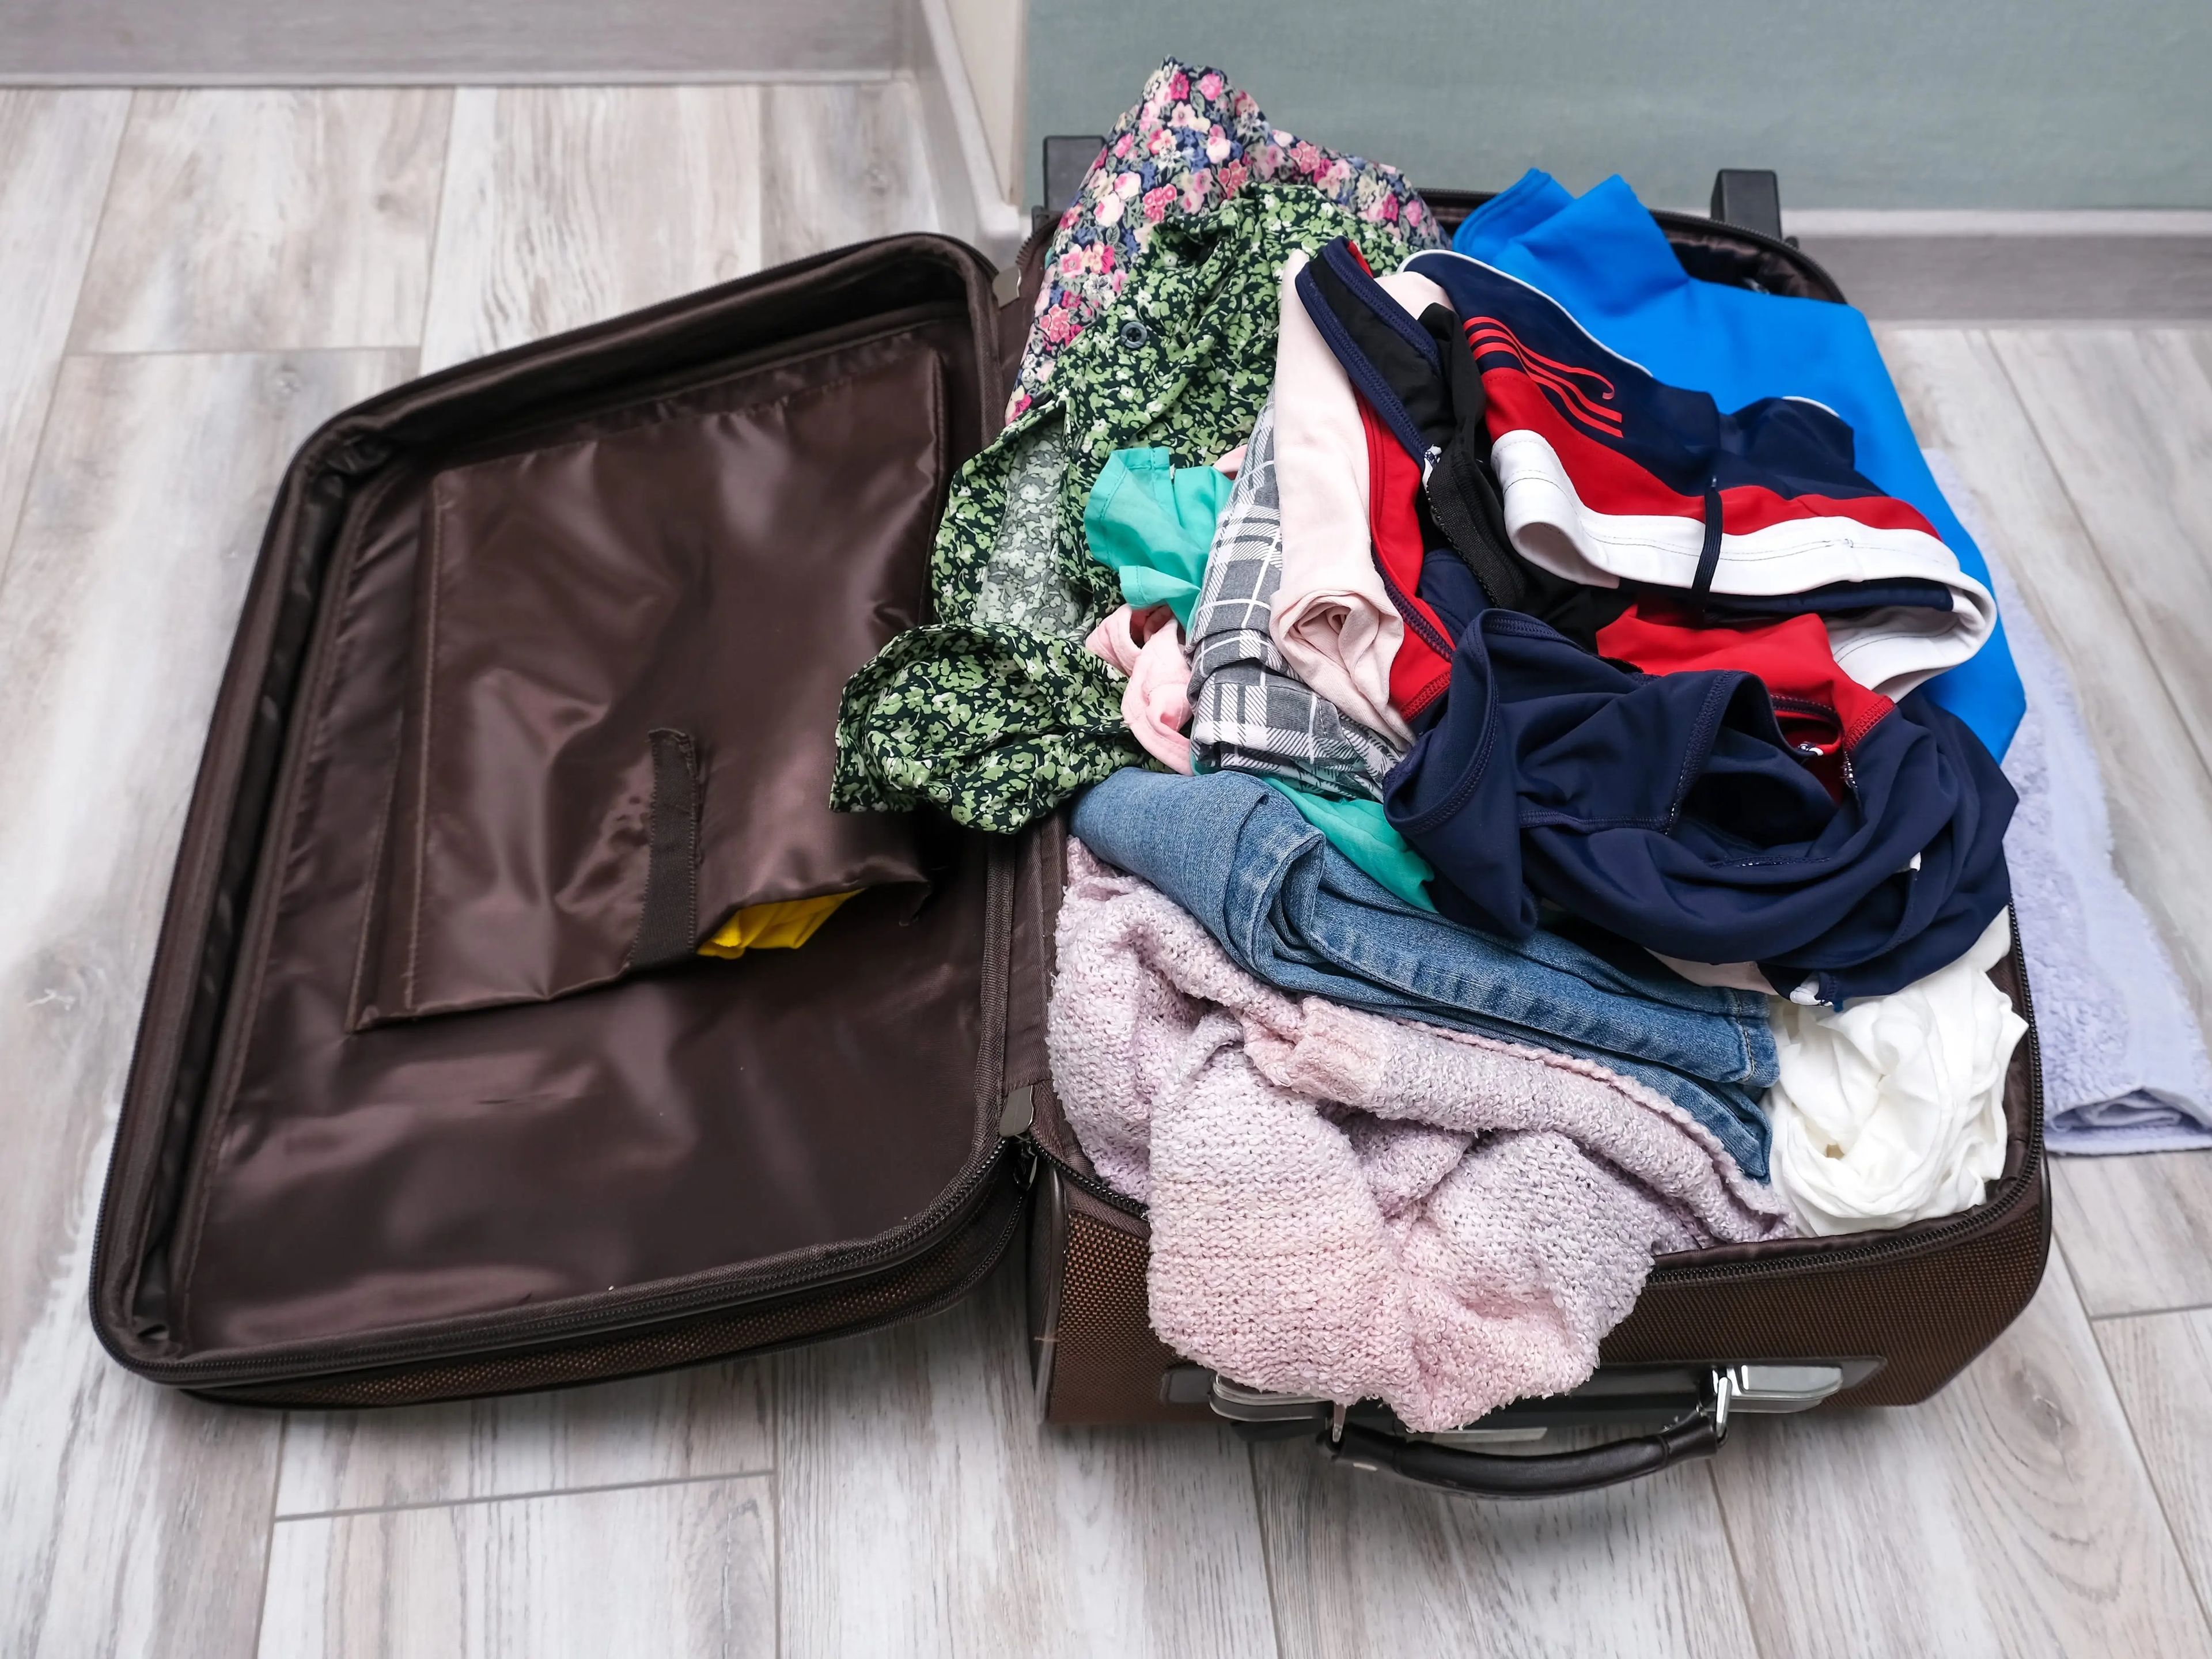 Brown suitcase filled with clothes on gray wooden floors